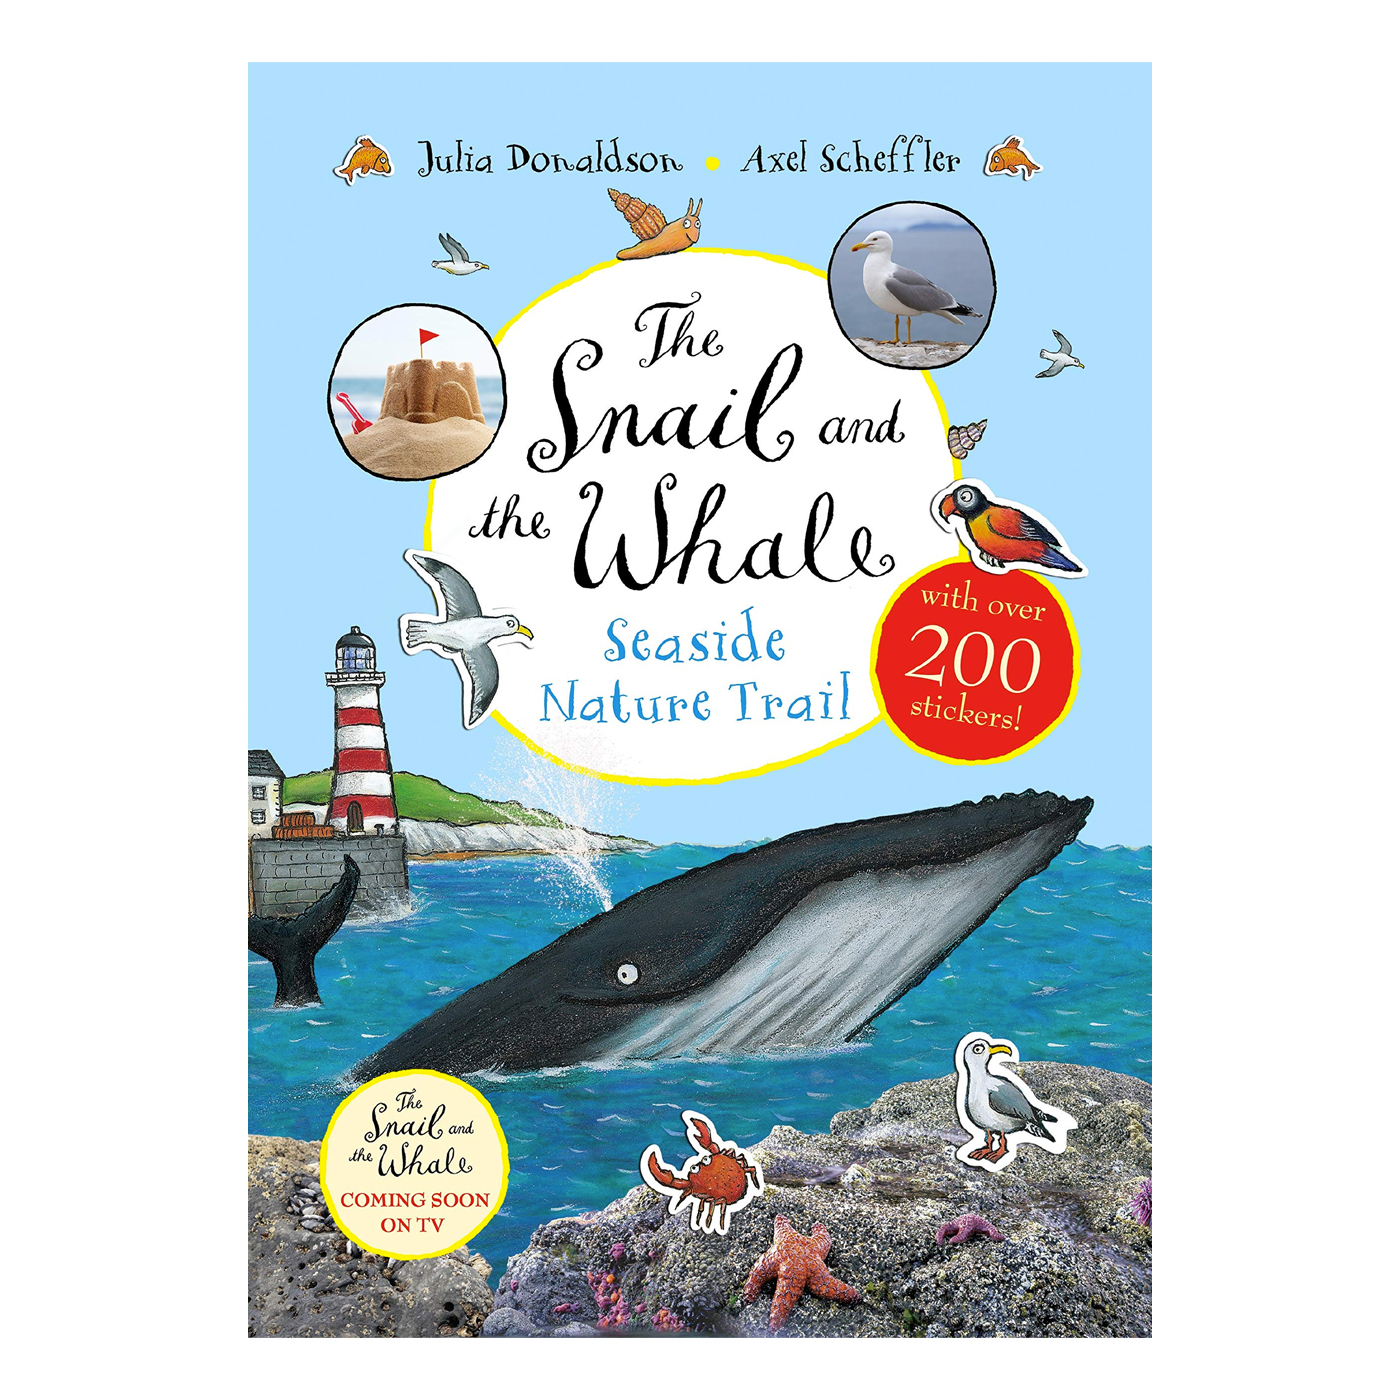 PAN MACMILLAN The Snail and the Whale Seaside Nature Trail